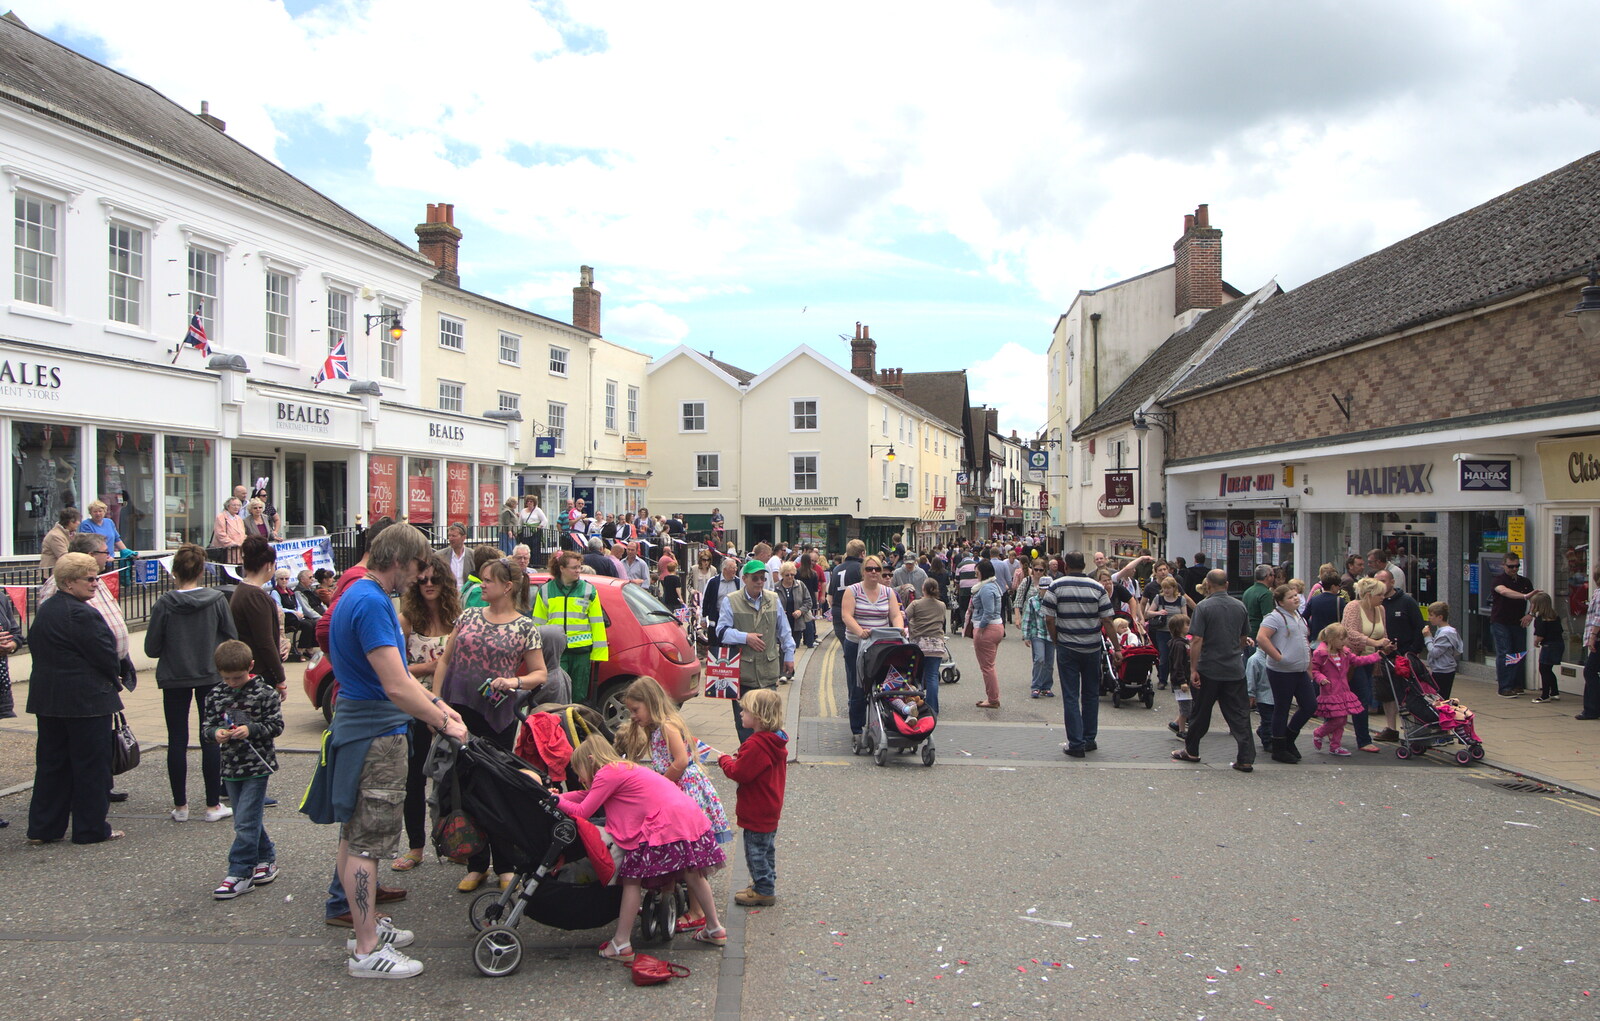 The crowds spread across the market place from Morris Dancing and a Carnival Procession, Diss, Norfolk - 17th June 2012